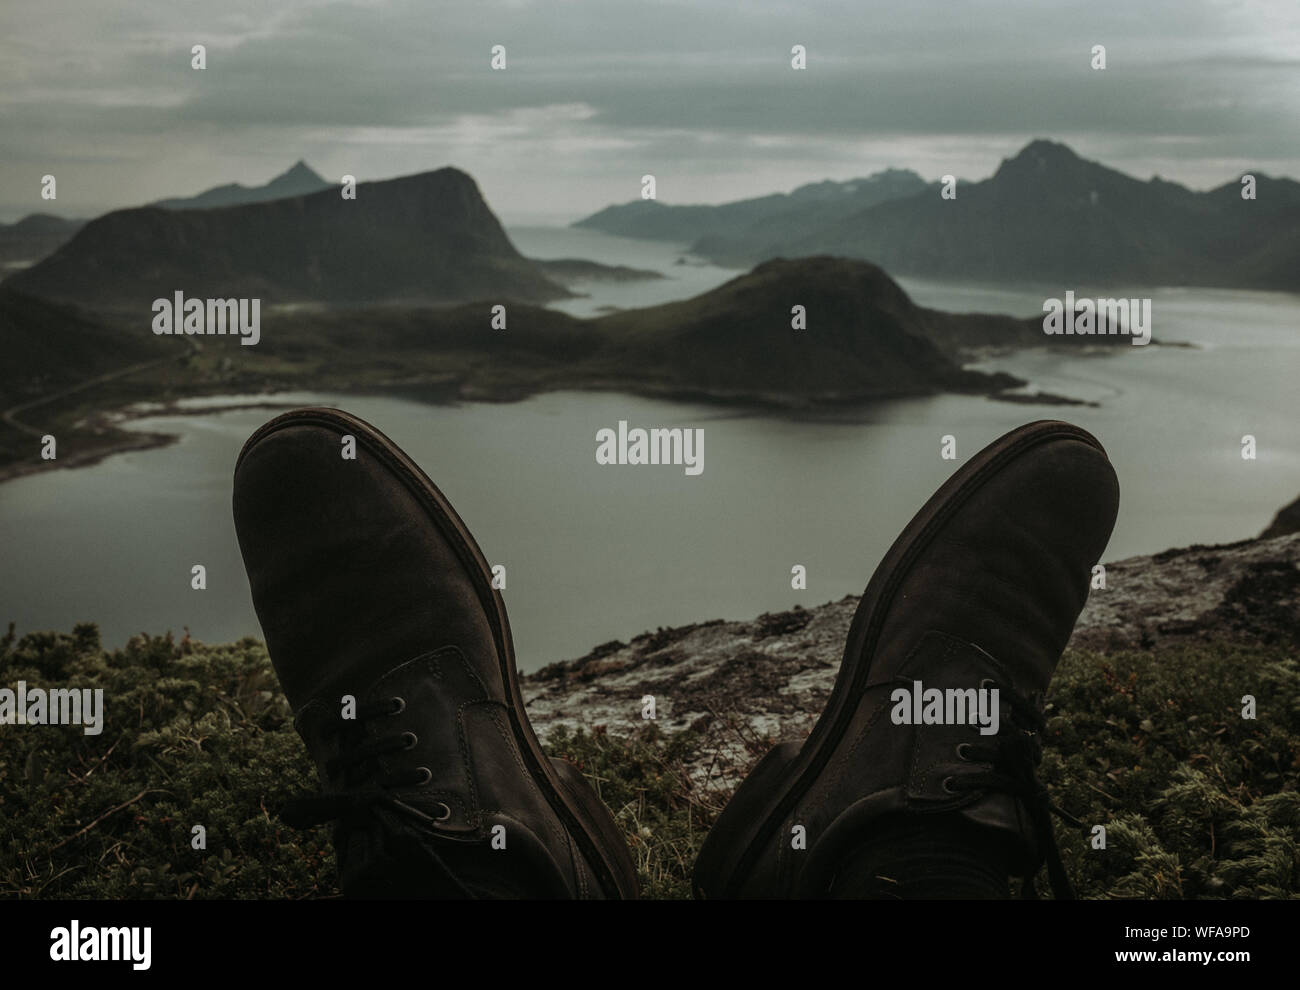 Low Section Of Shoes By Lake Against Mountain Range Stock Photo